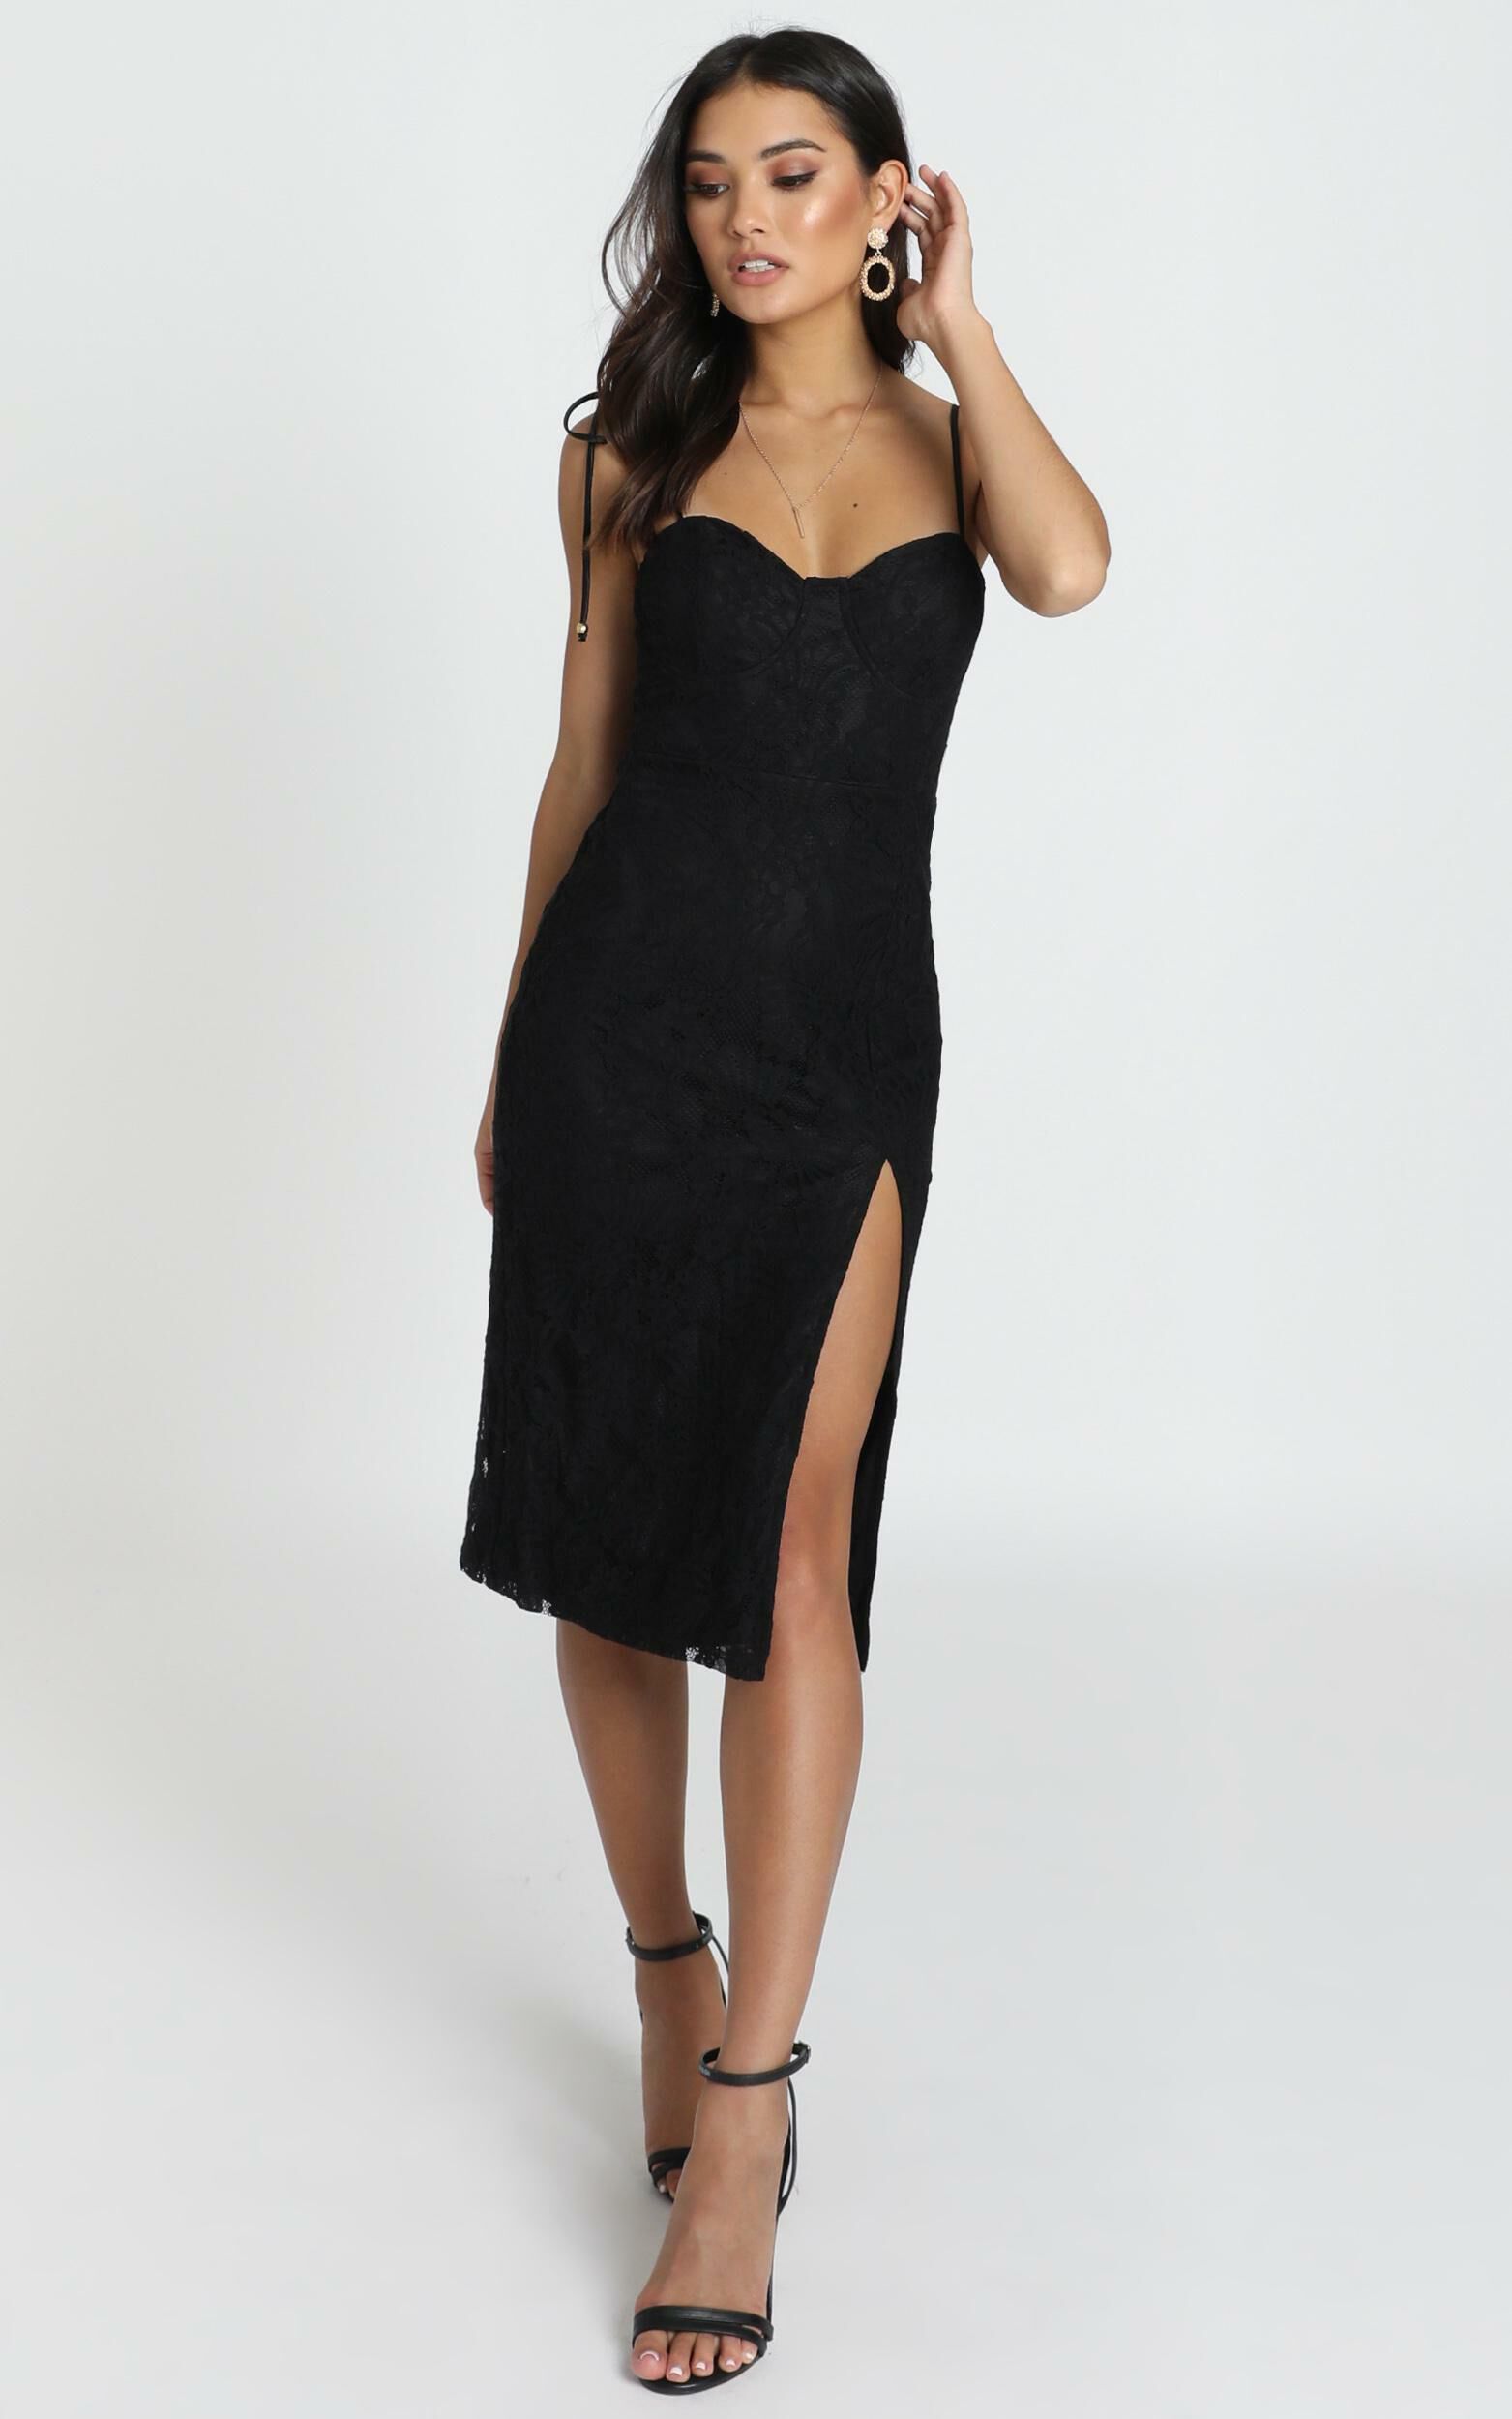 Youve Got The Power Dress in Black Lace | Showpo USA